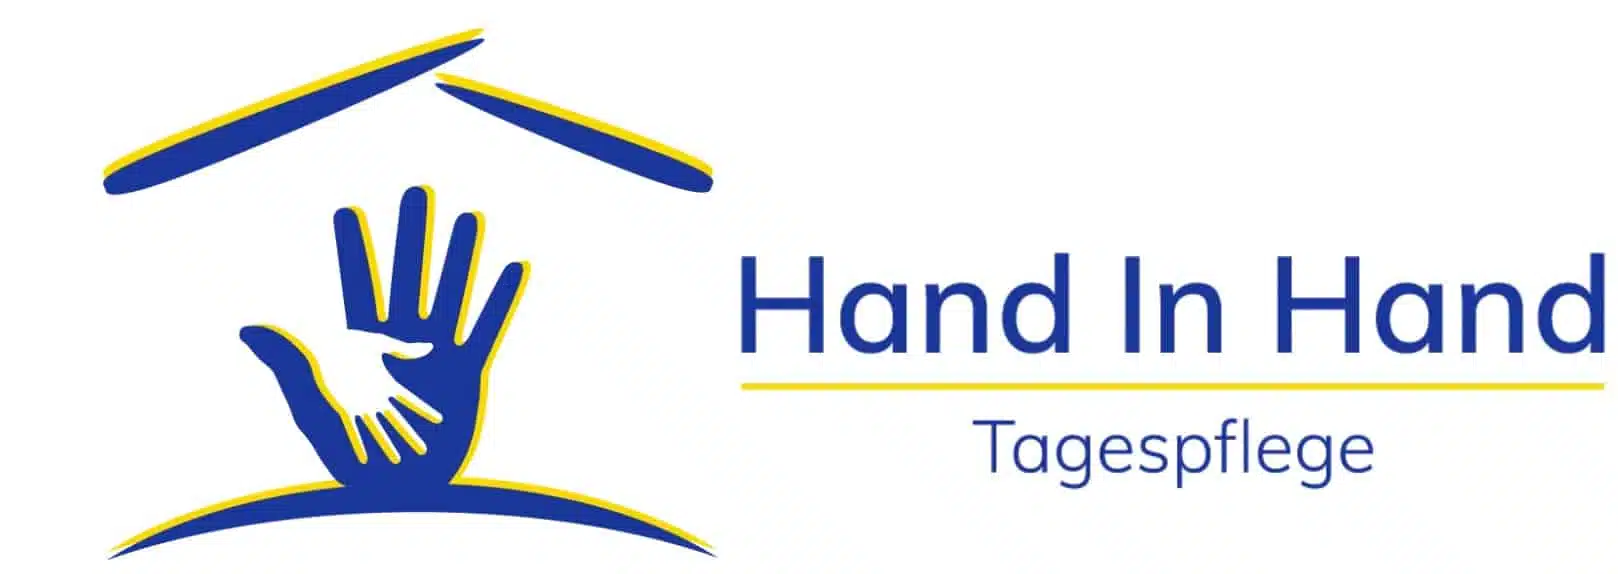 Logo: Tagespflege Hand in Hand